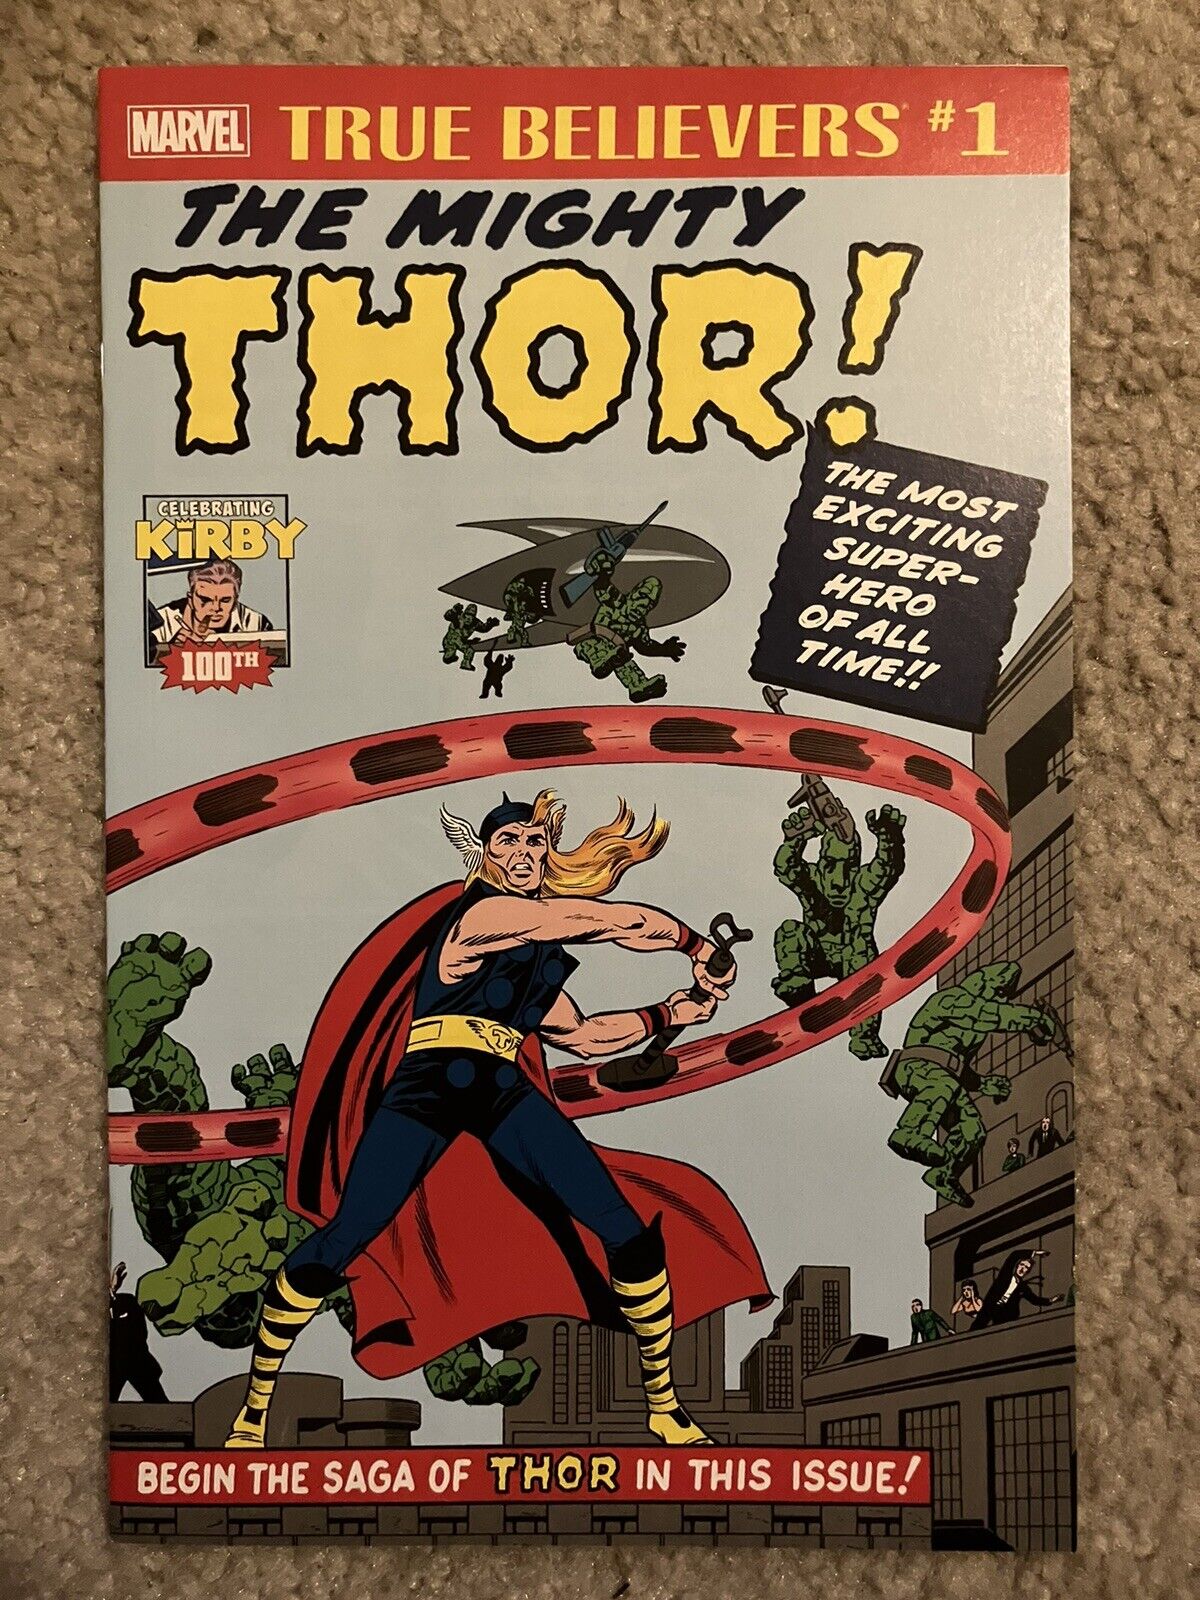 True Believers: Thor #1 Reprint Of Journey Into Mystery #83 Jack Kirby 100